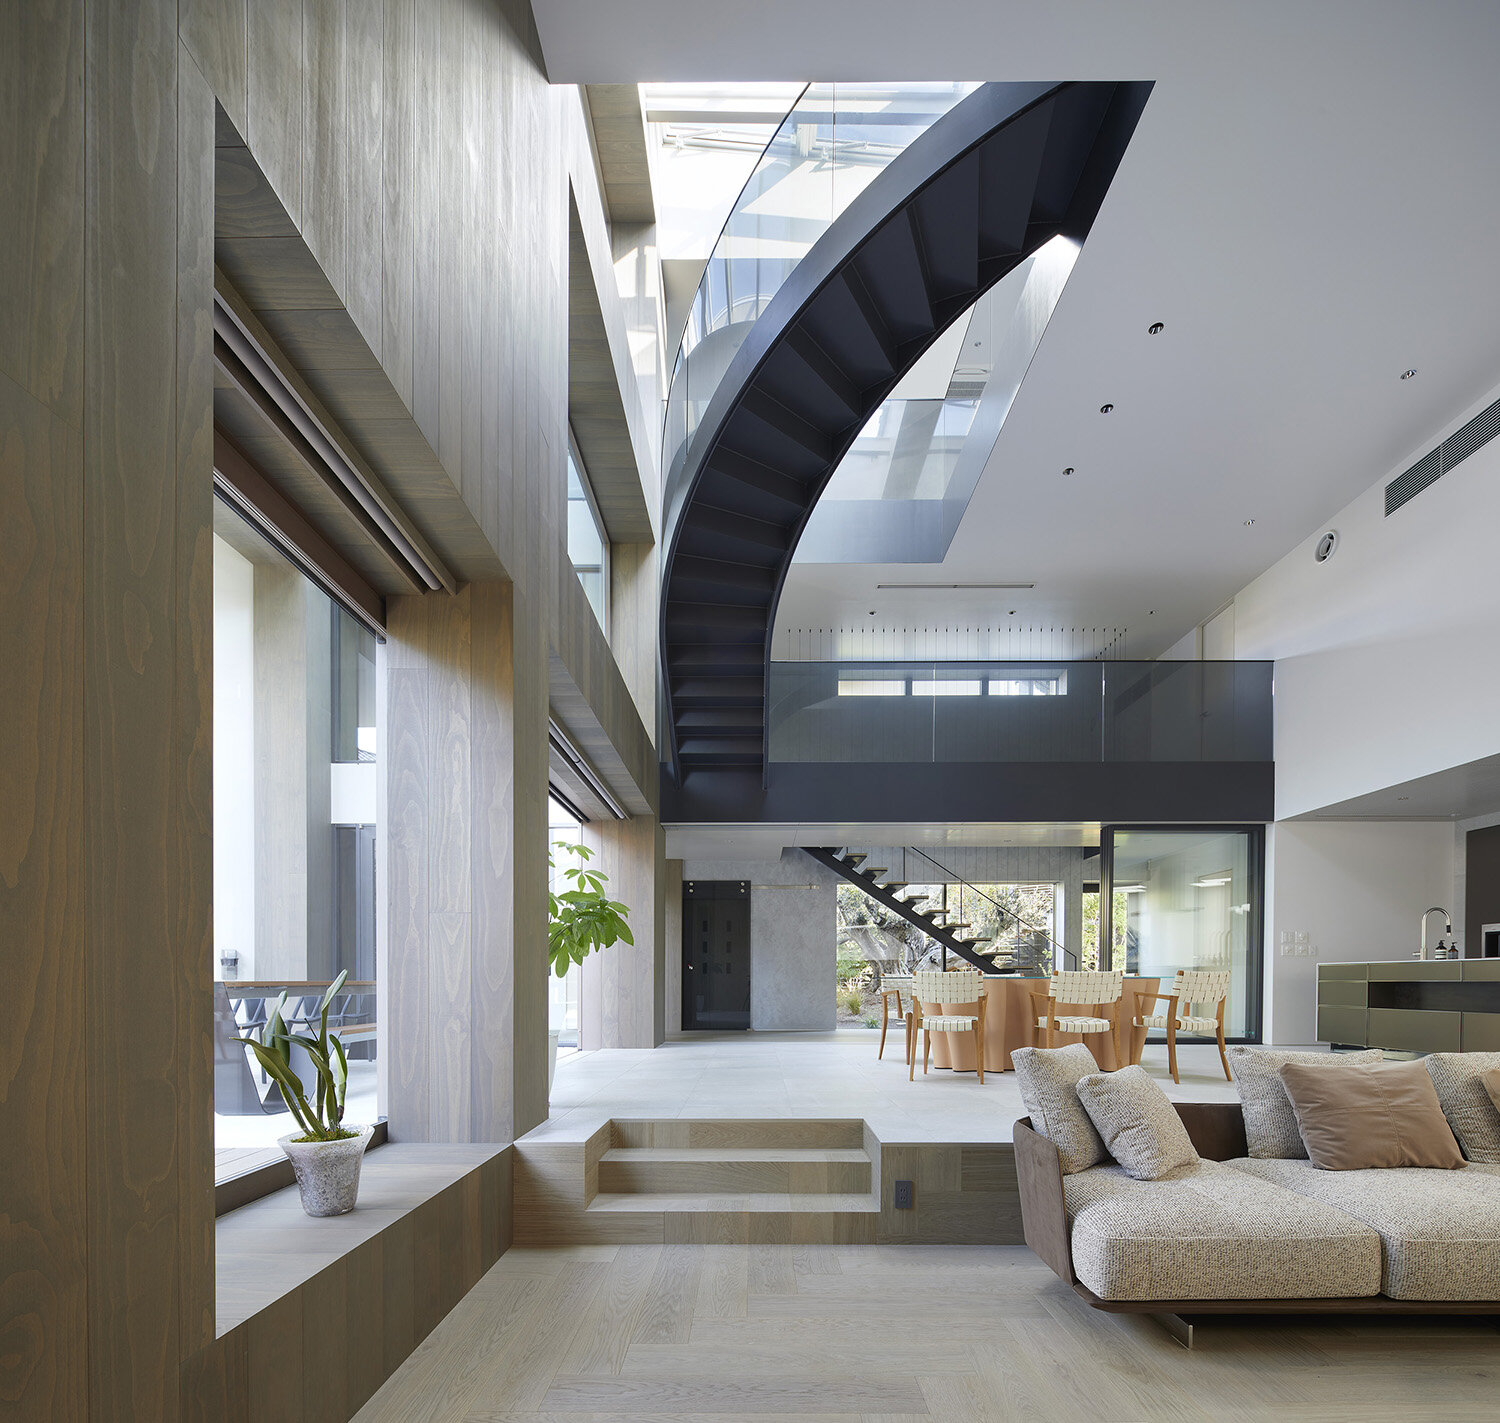  Living room of ‘Shoto S’, a residence designed by Japanese architecture design studio SINATO led by Chikara Ono. 